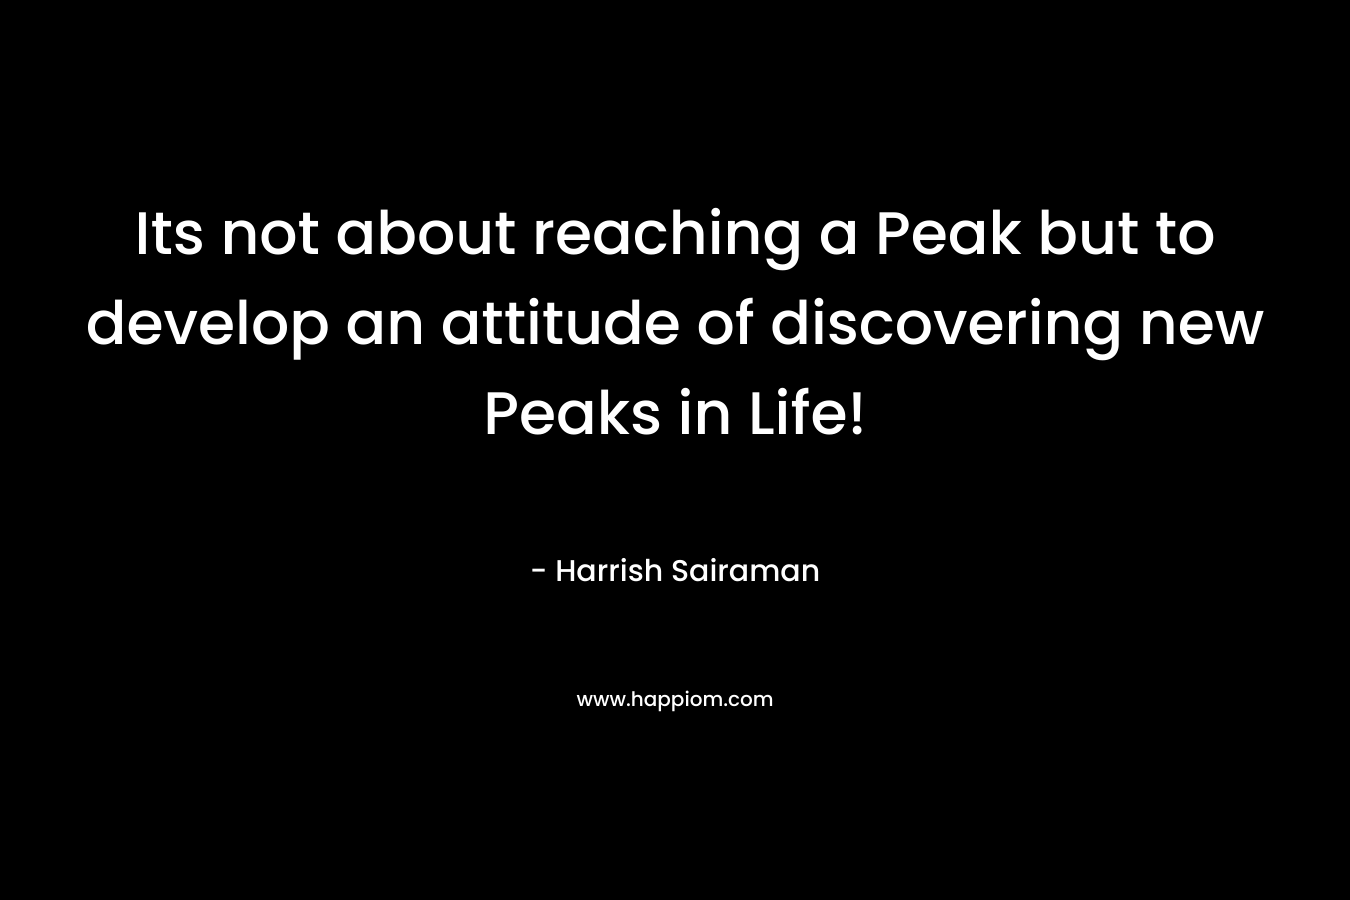 Its not about reaching a Peak but to develop an attitude of discovering new Peaks in Life! – Harrish Sairaman